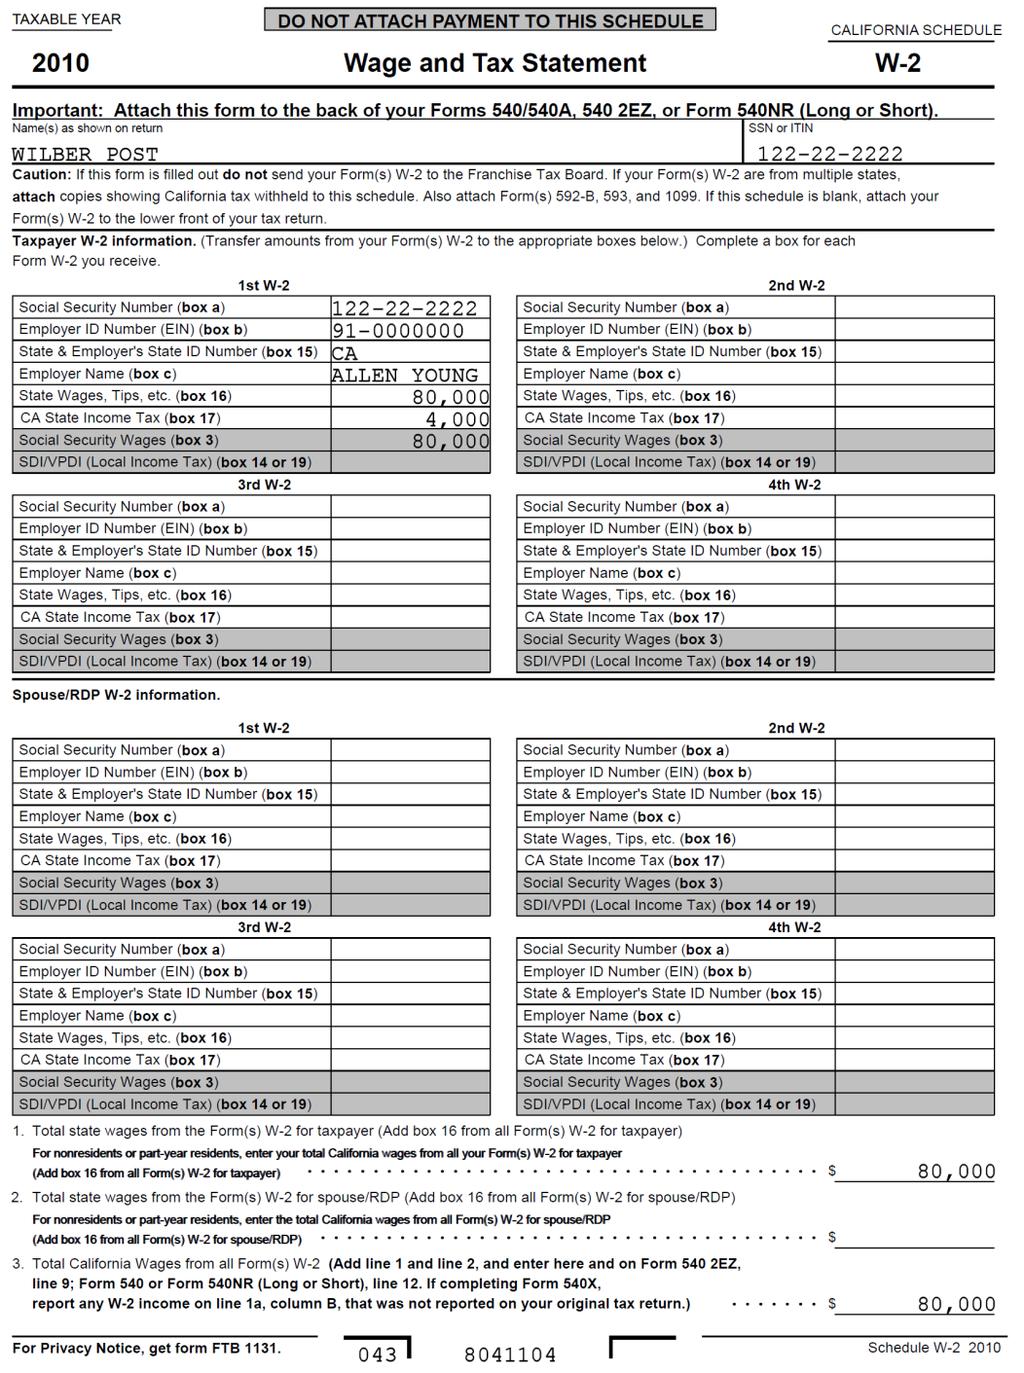 California Schedule W-2 CG is attached to report wages earned by Wilber